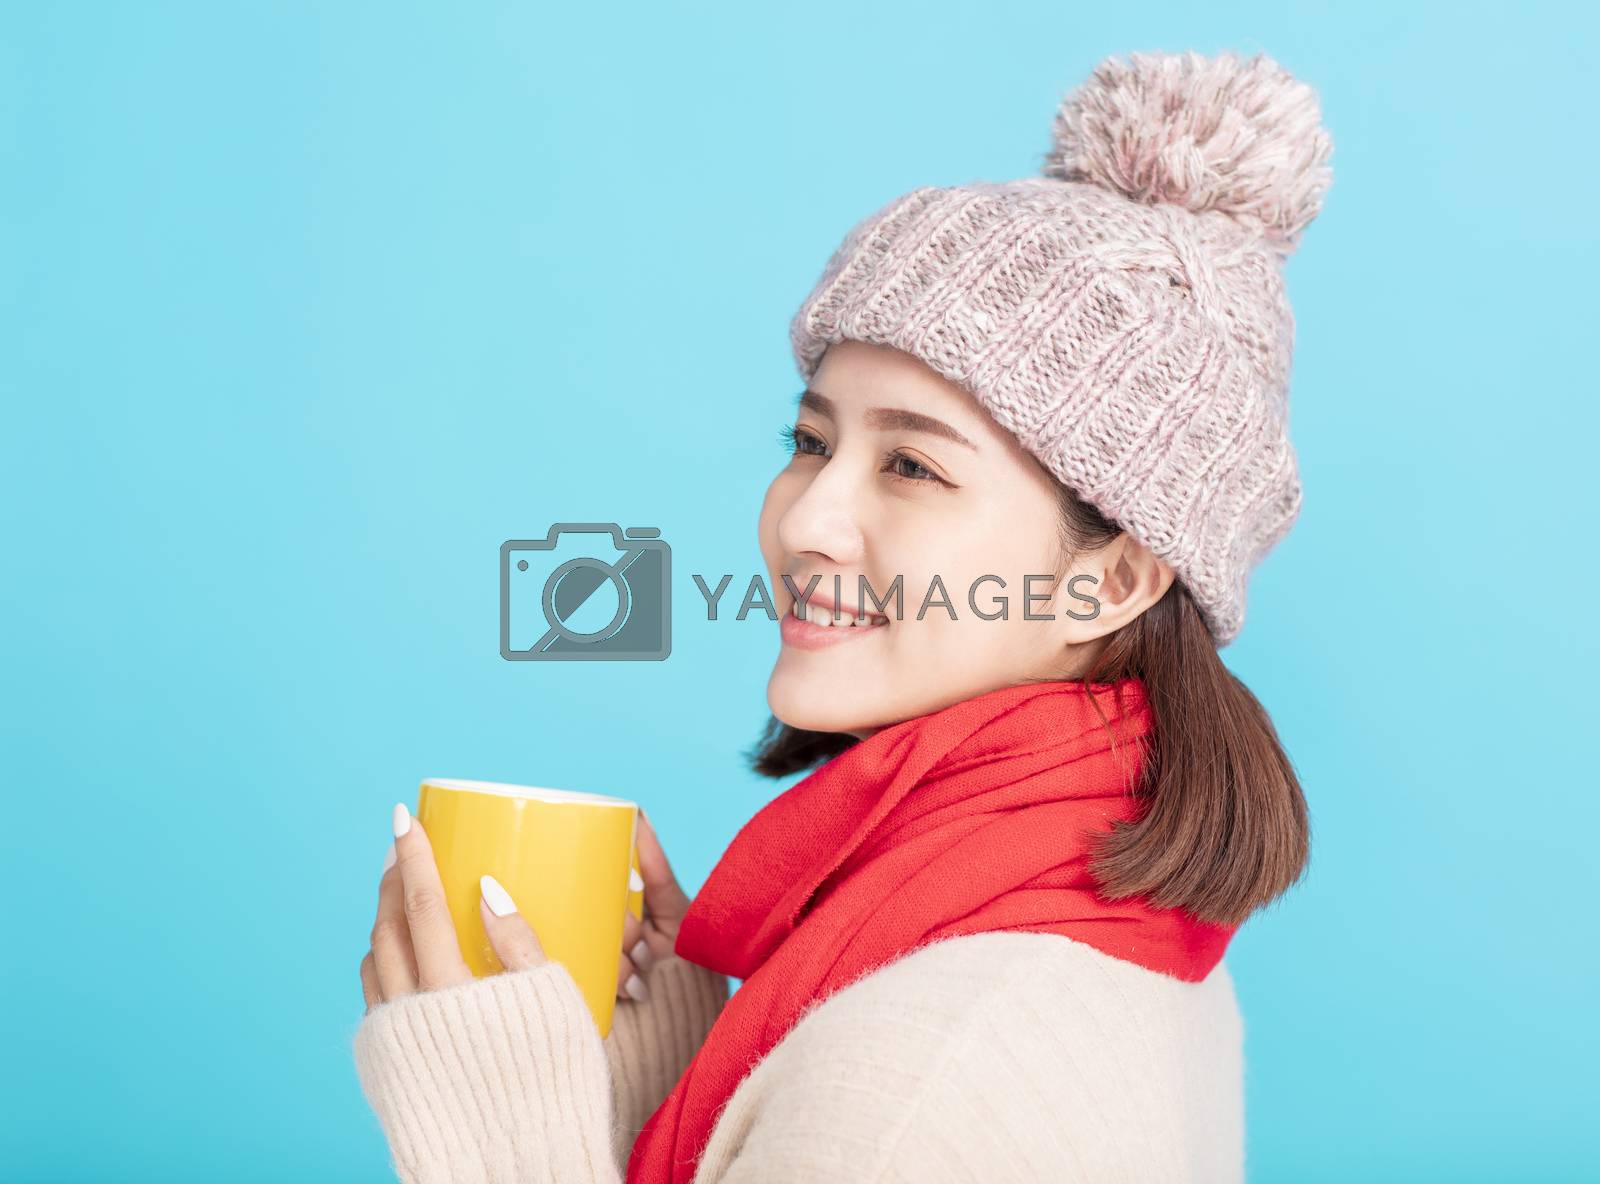 Royalty free image of young woman Enjoying a Cup of Hot Tea in Hands by tomwang